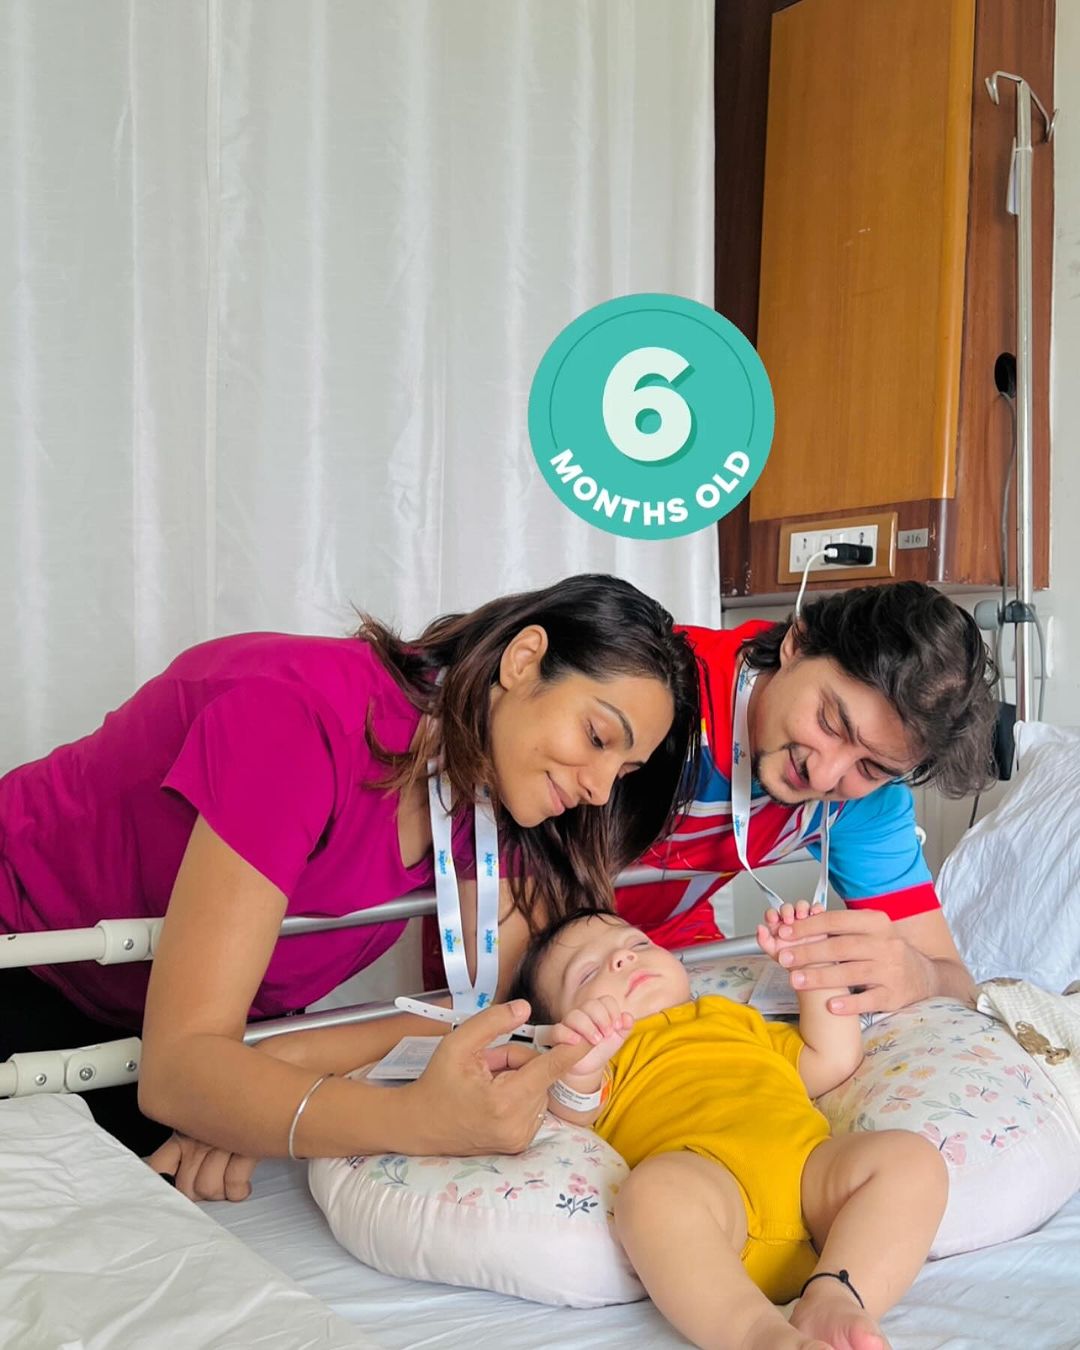 Tanvi Thakkar Shared She Cancels All Their Staycation Bookings For Her Son’s Six Month Celebration. She Had Hospitalised Her Little Boy And Wish To Take His Pain Upon Herself.